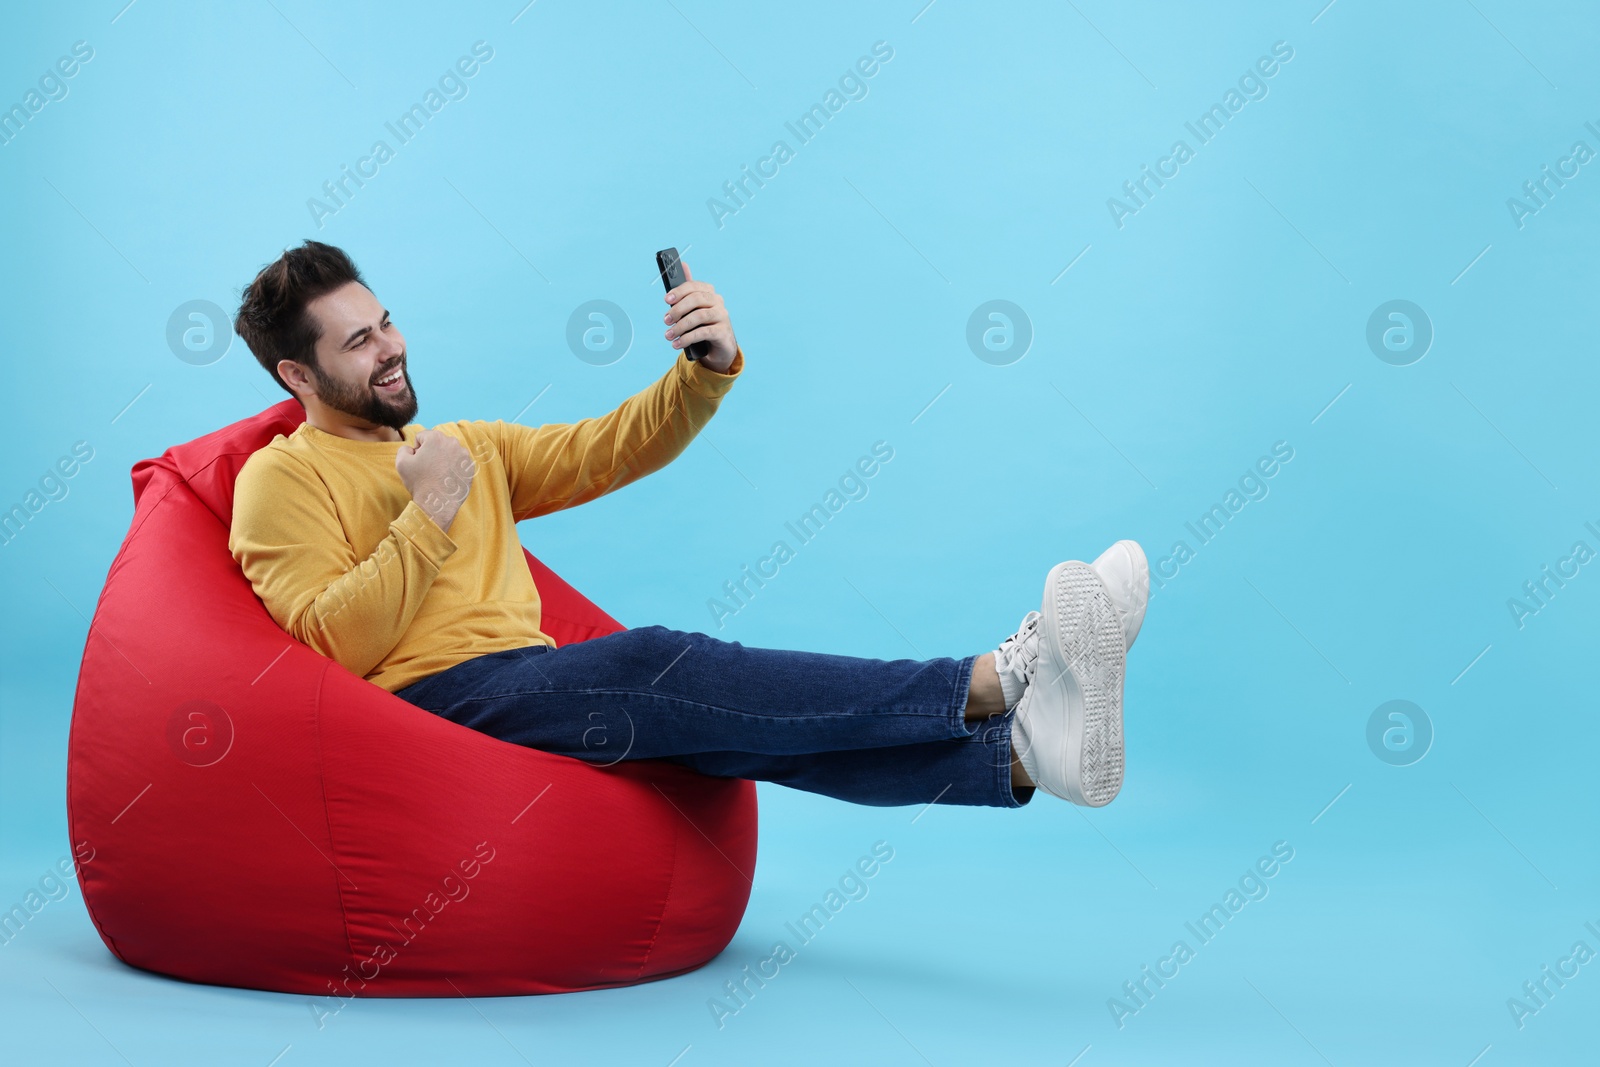 Photo of Happy young man using smartphone on bean bag chair against light blue background. Space for text